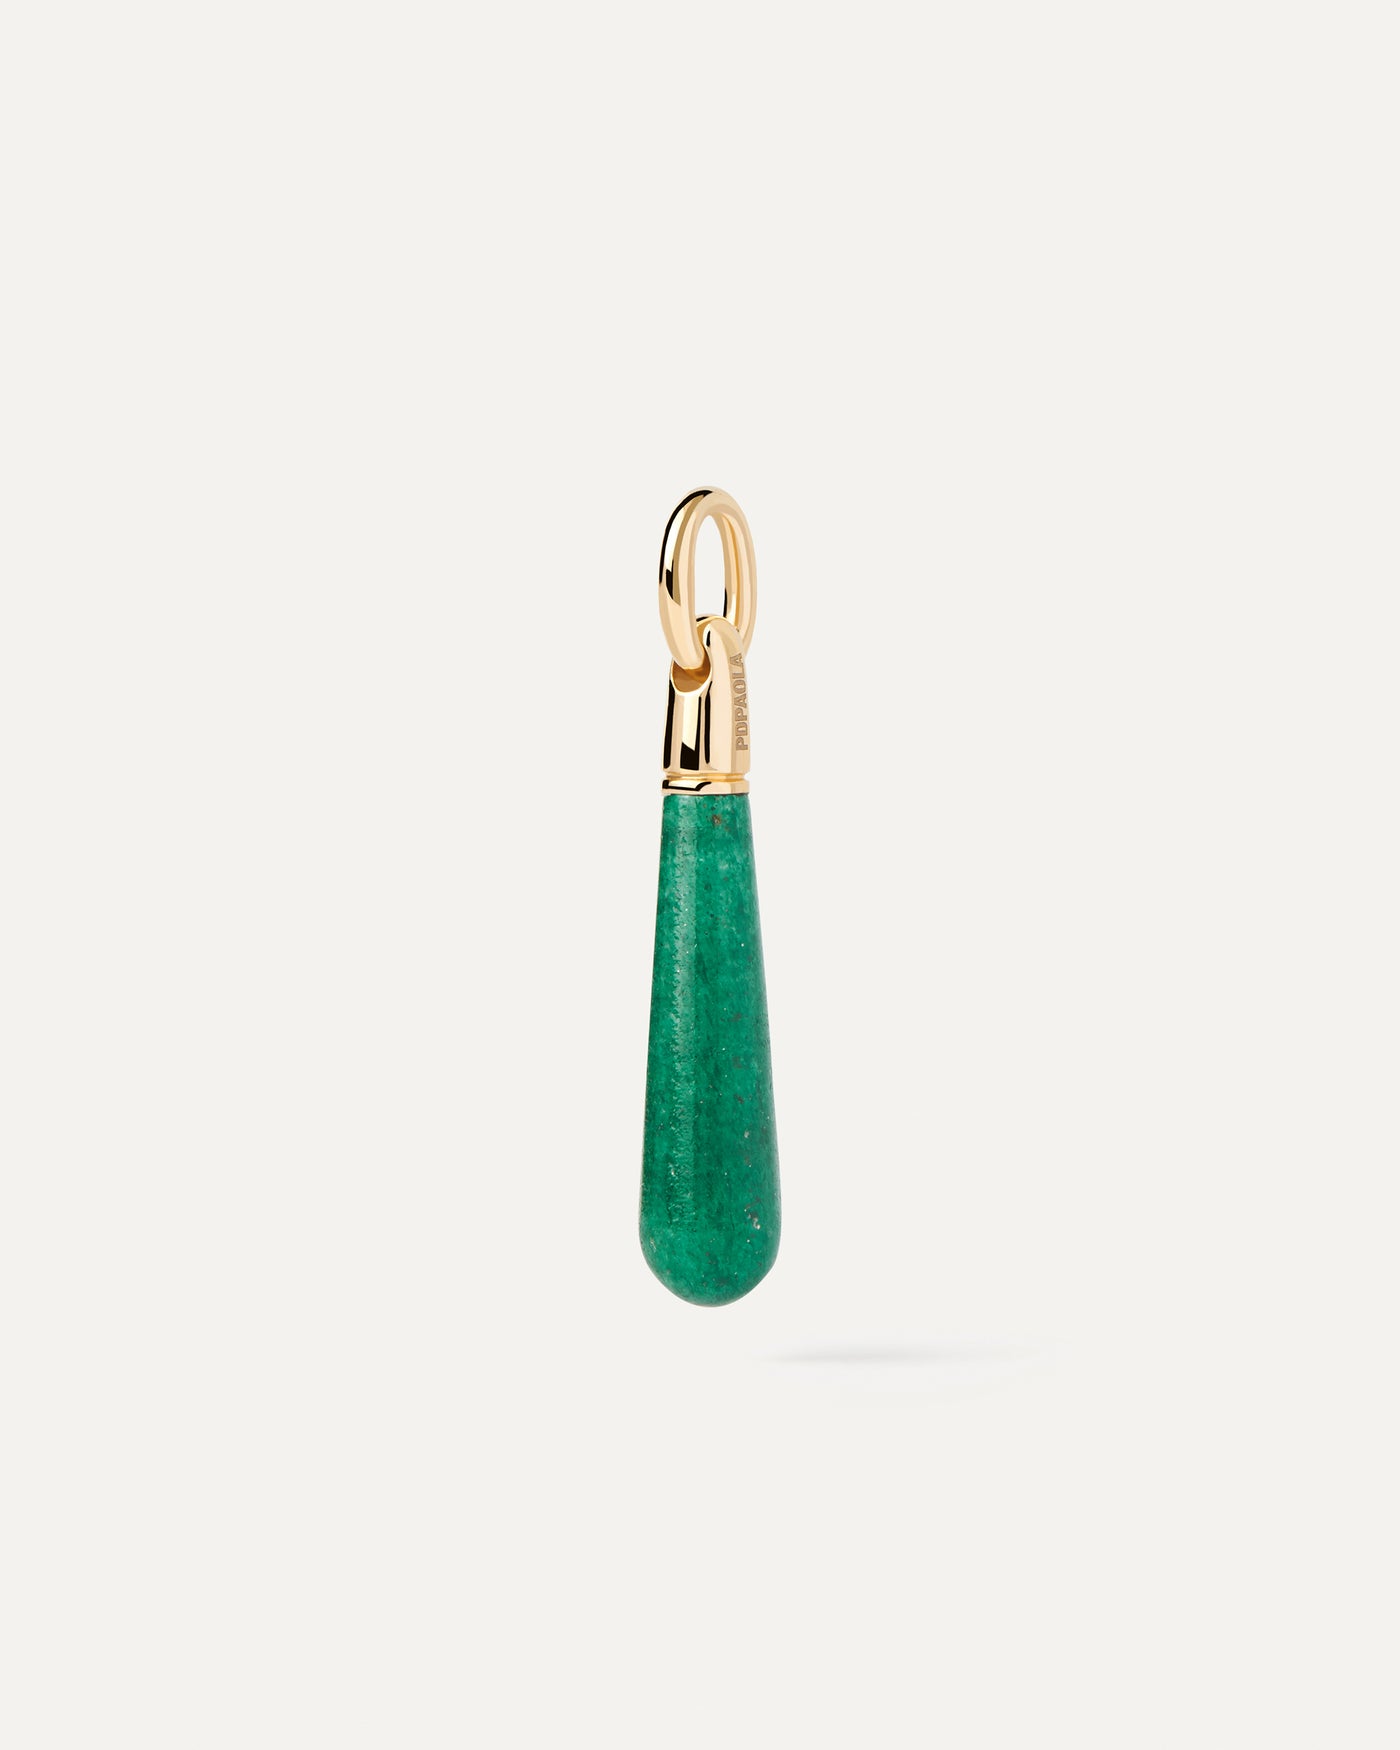 2023 Selection | Green Aventurine Large Drop Pendant. Get the latest arrival from PDPAOLA. Place your order safely and get this Best Seller. Free Shipping.